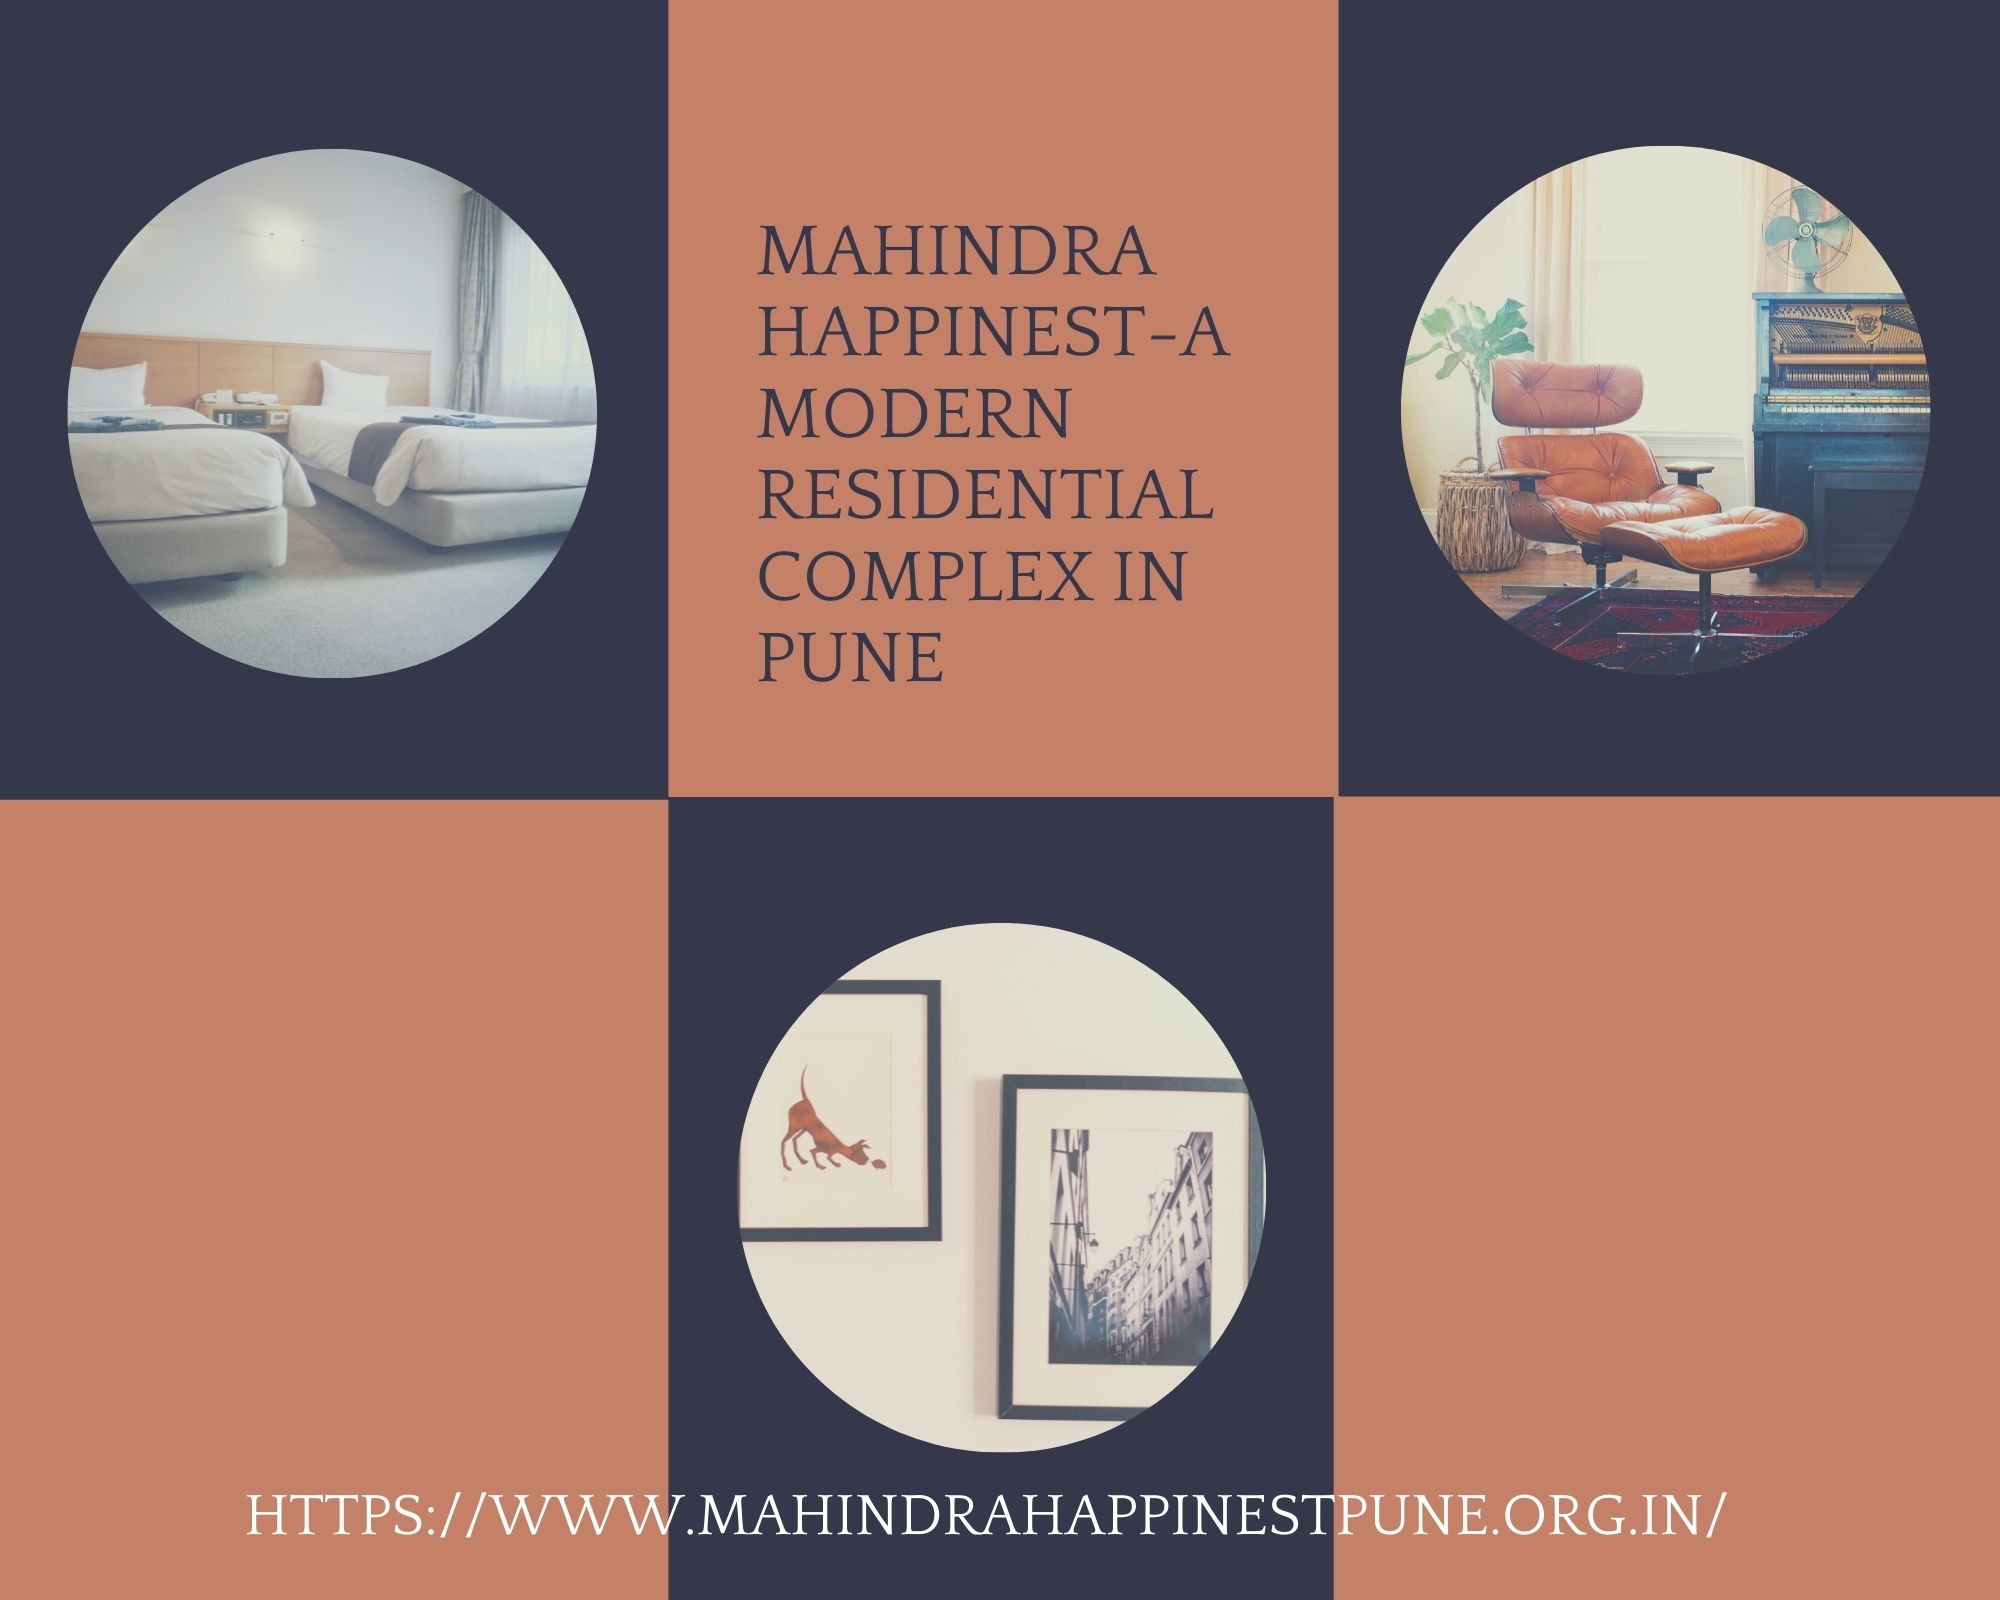 Mahindra Happinest-a modern residential complex in Pune